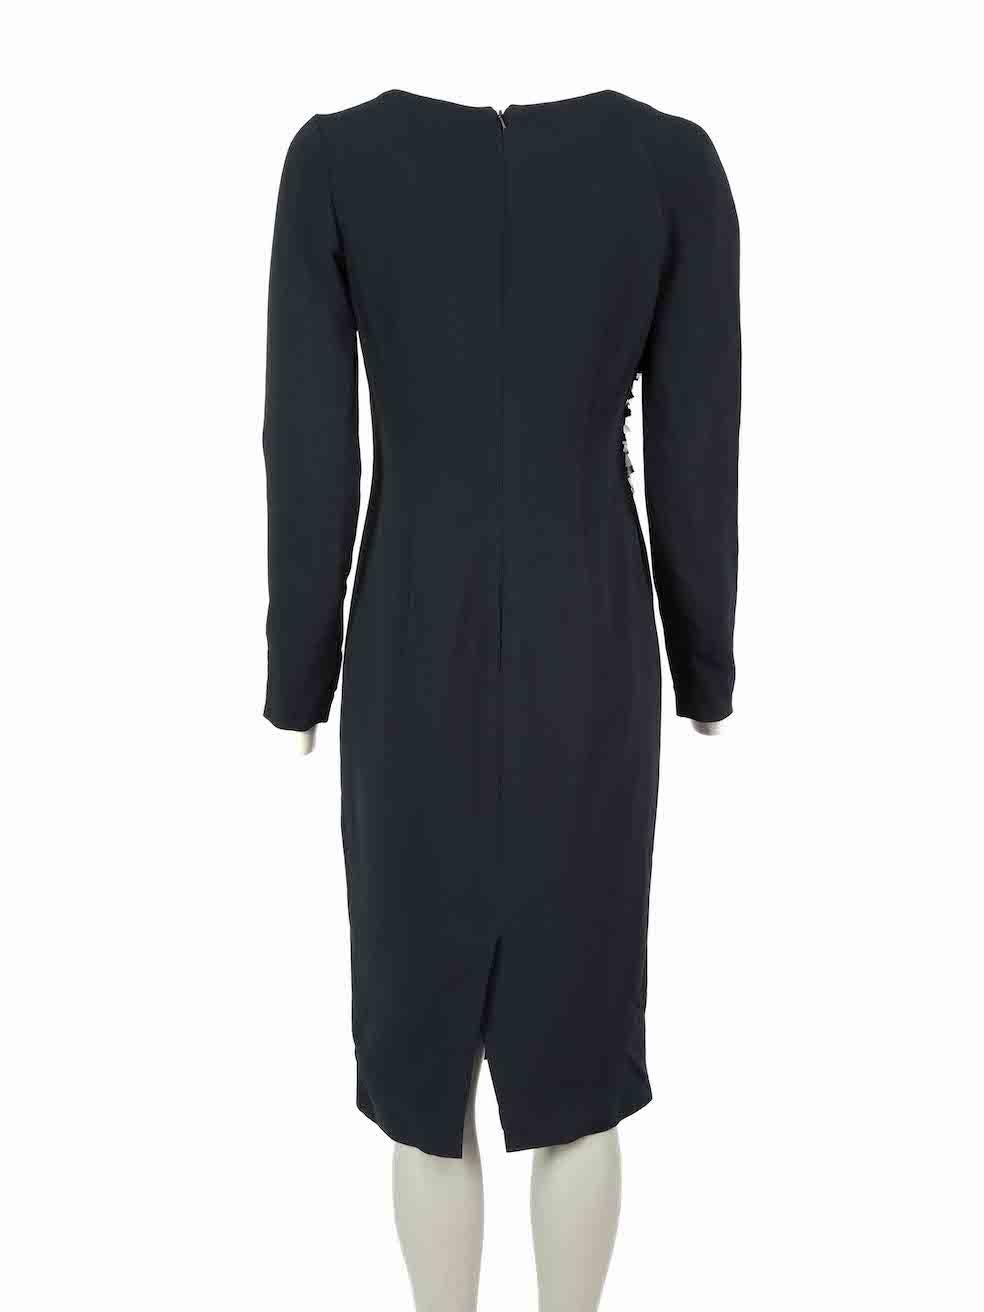 Cushnie et Ochs Navy Embellished Cut Out Dress Size S In Good Condition For Sale In London, GB